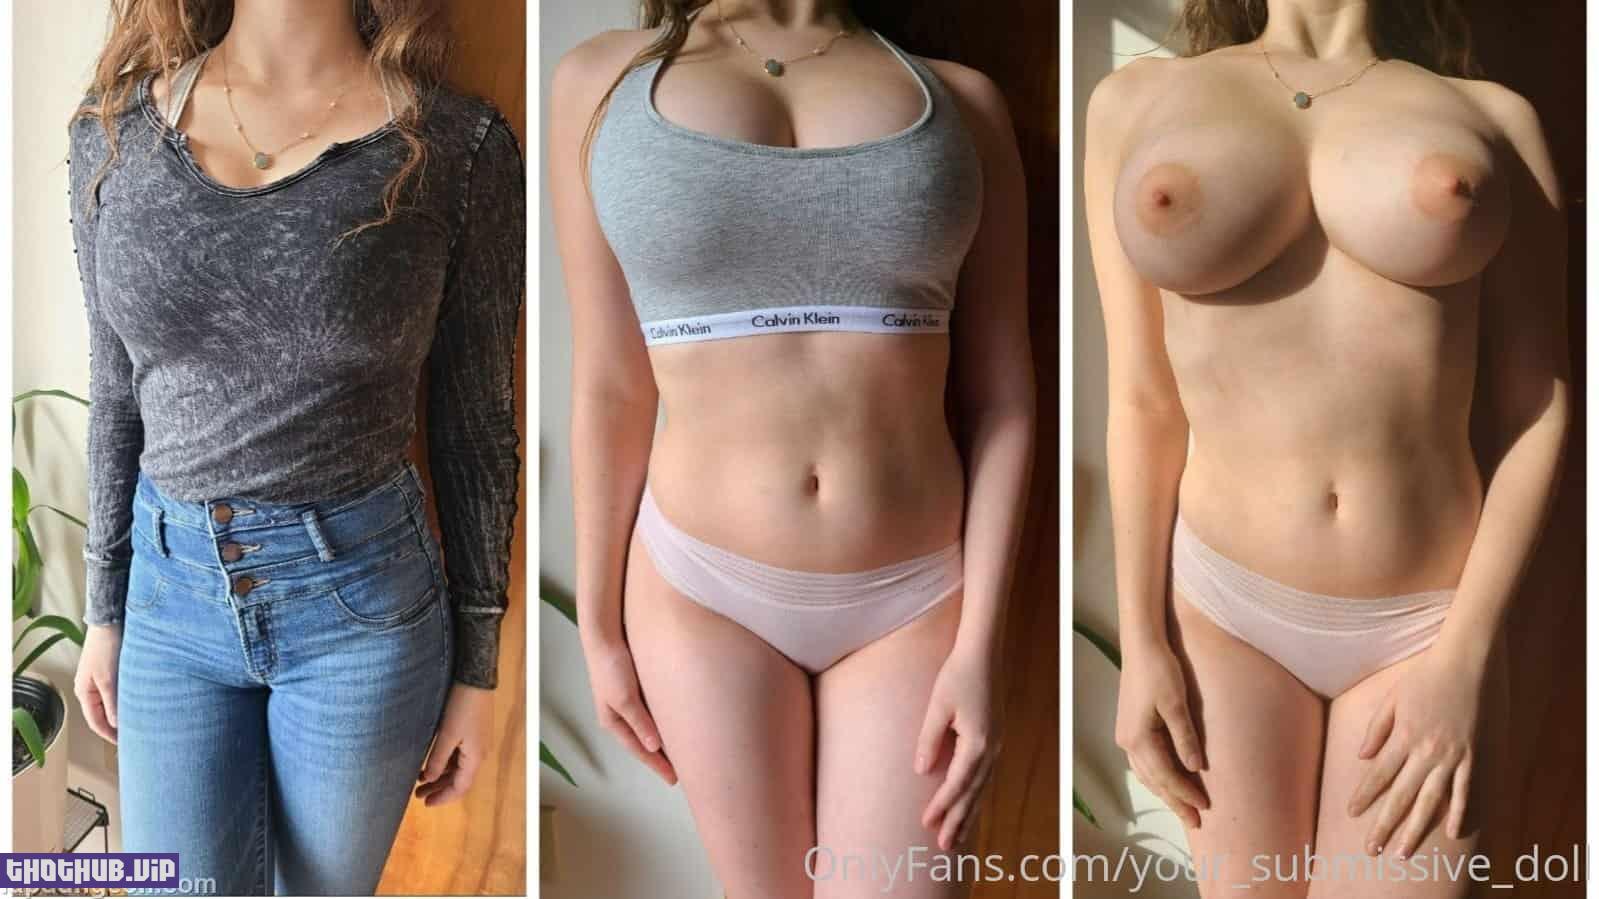 1661010891 624 Your submissive doll aka Valorie %E2%80%93 Busty Pale Girl Onlyfans Nudes